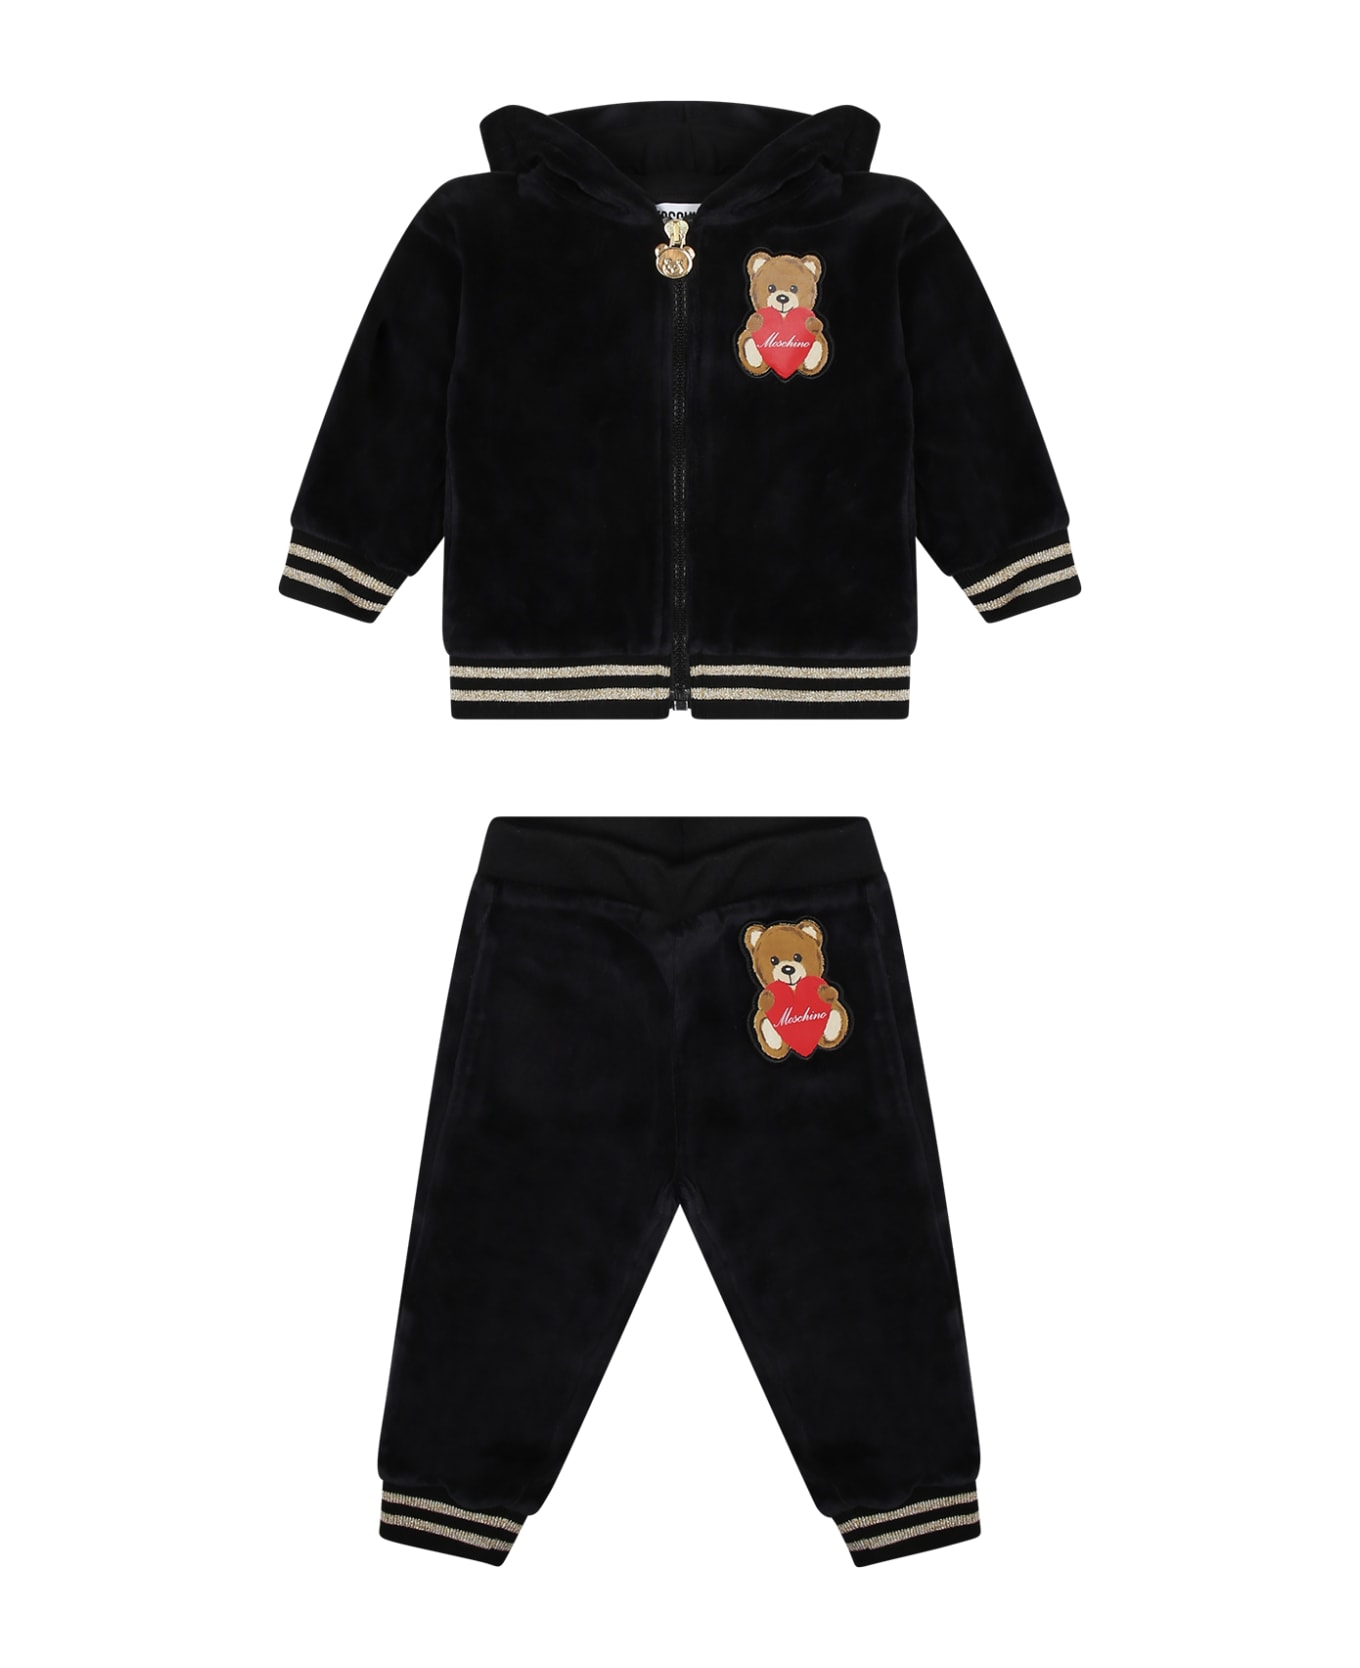 Moschino Black Brushed Cotton Set For Baby Girl - Black ボトムス